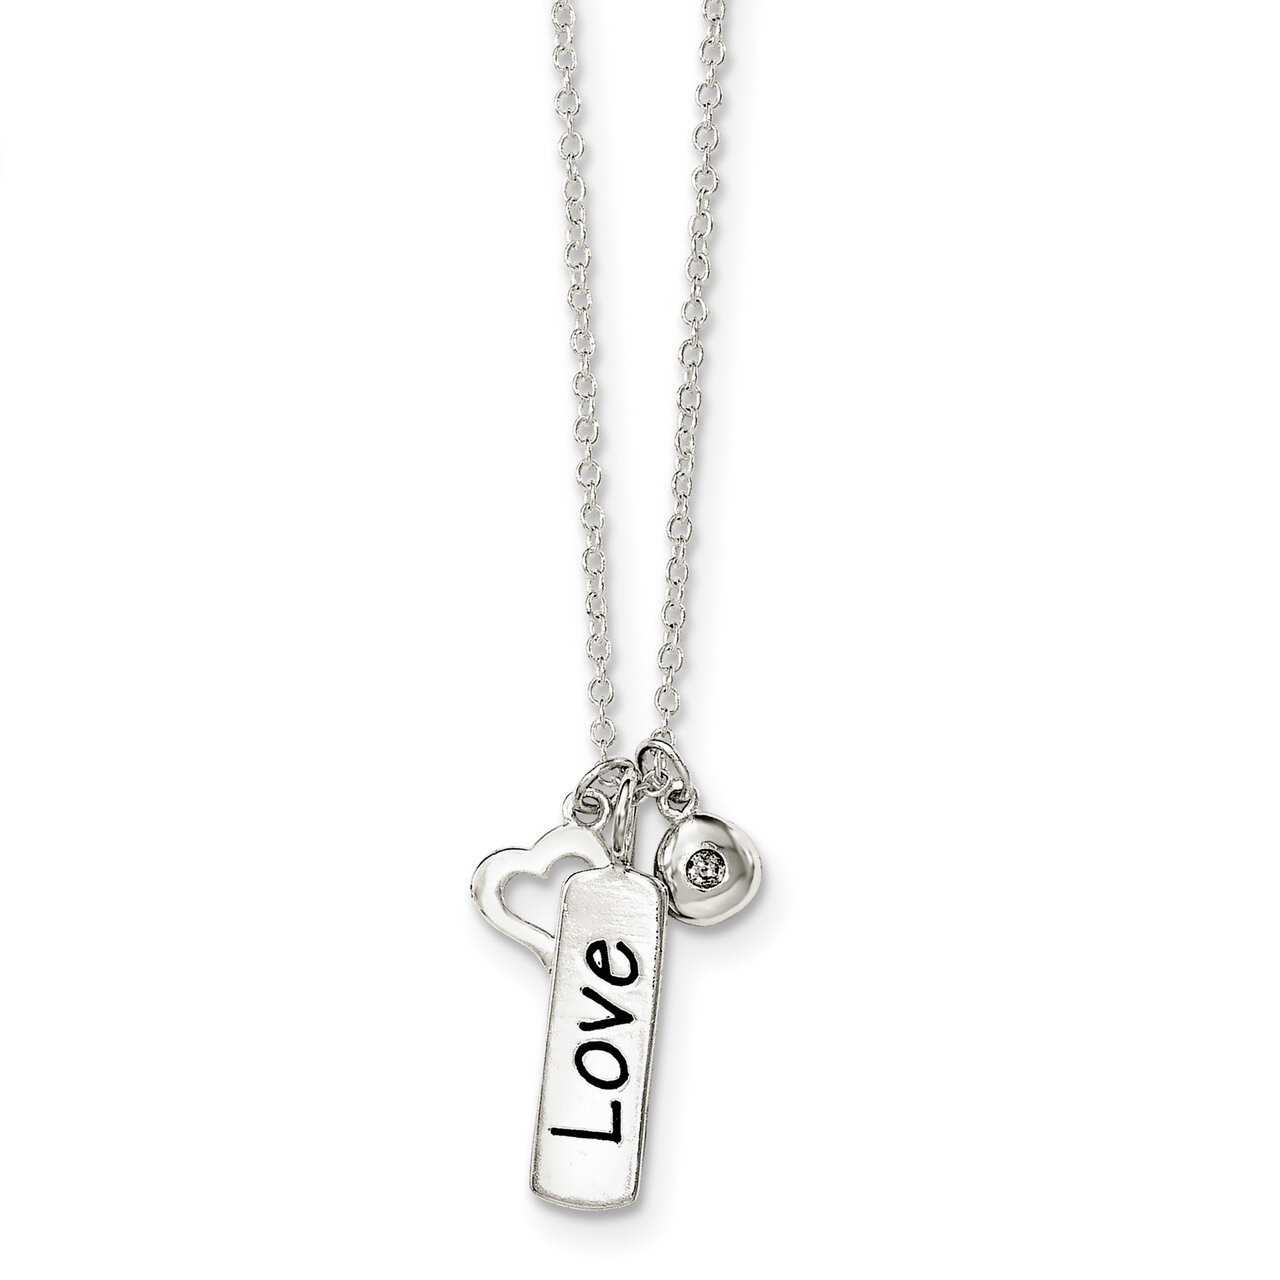 CZ Diamond Love Heart Charm with 1 inch ext Necklace 16 Inch Sterling Silver Polished QG4032-16